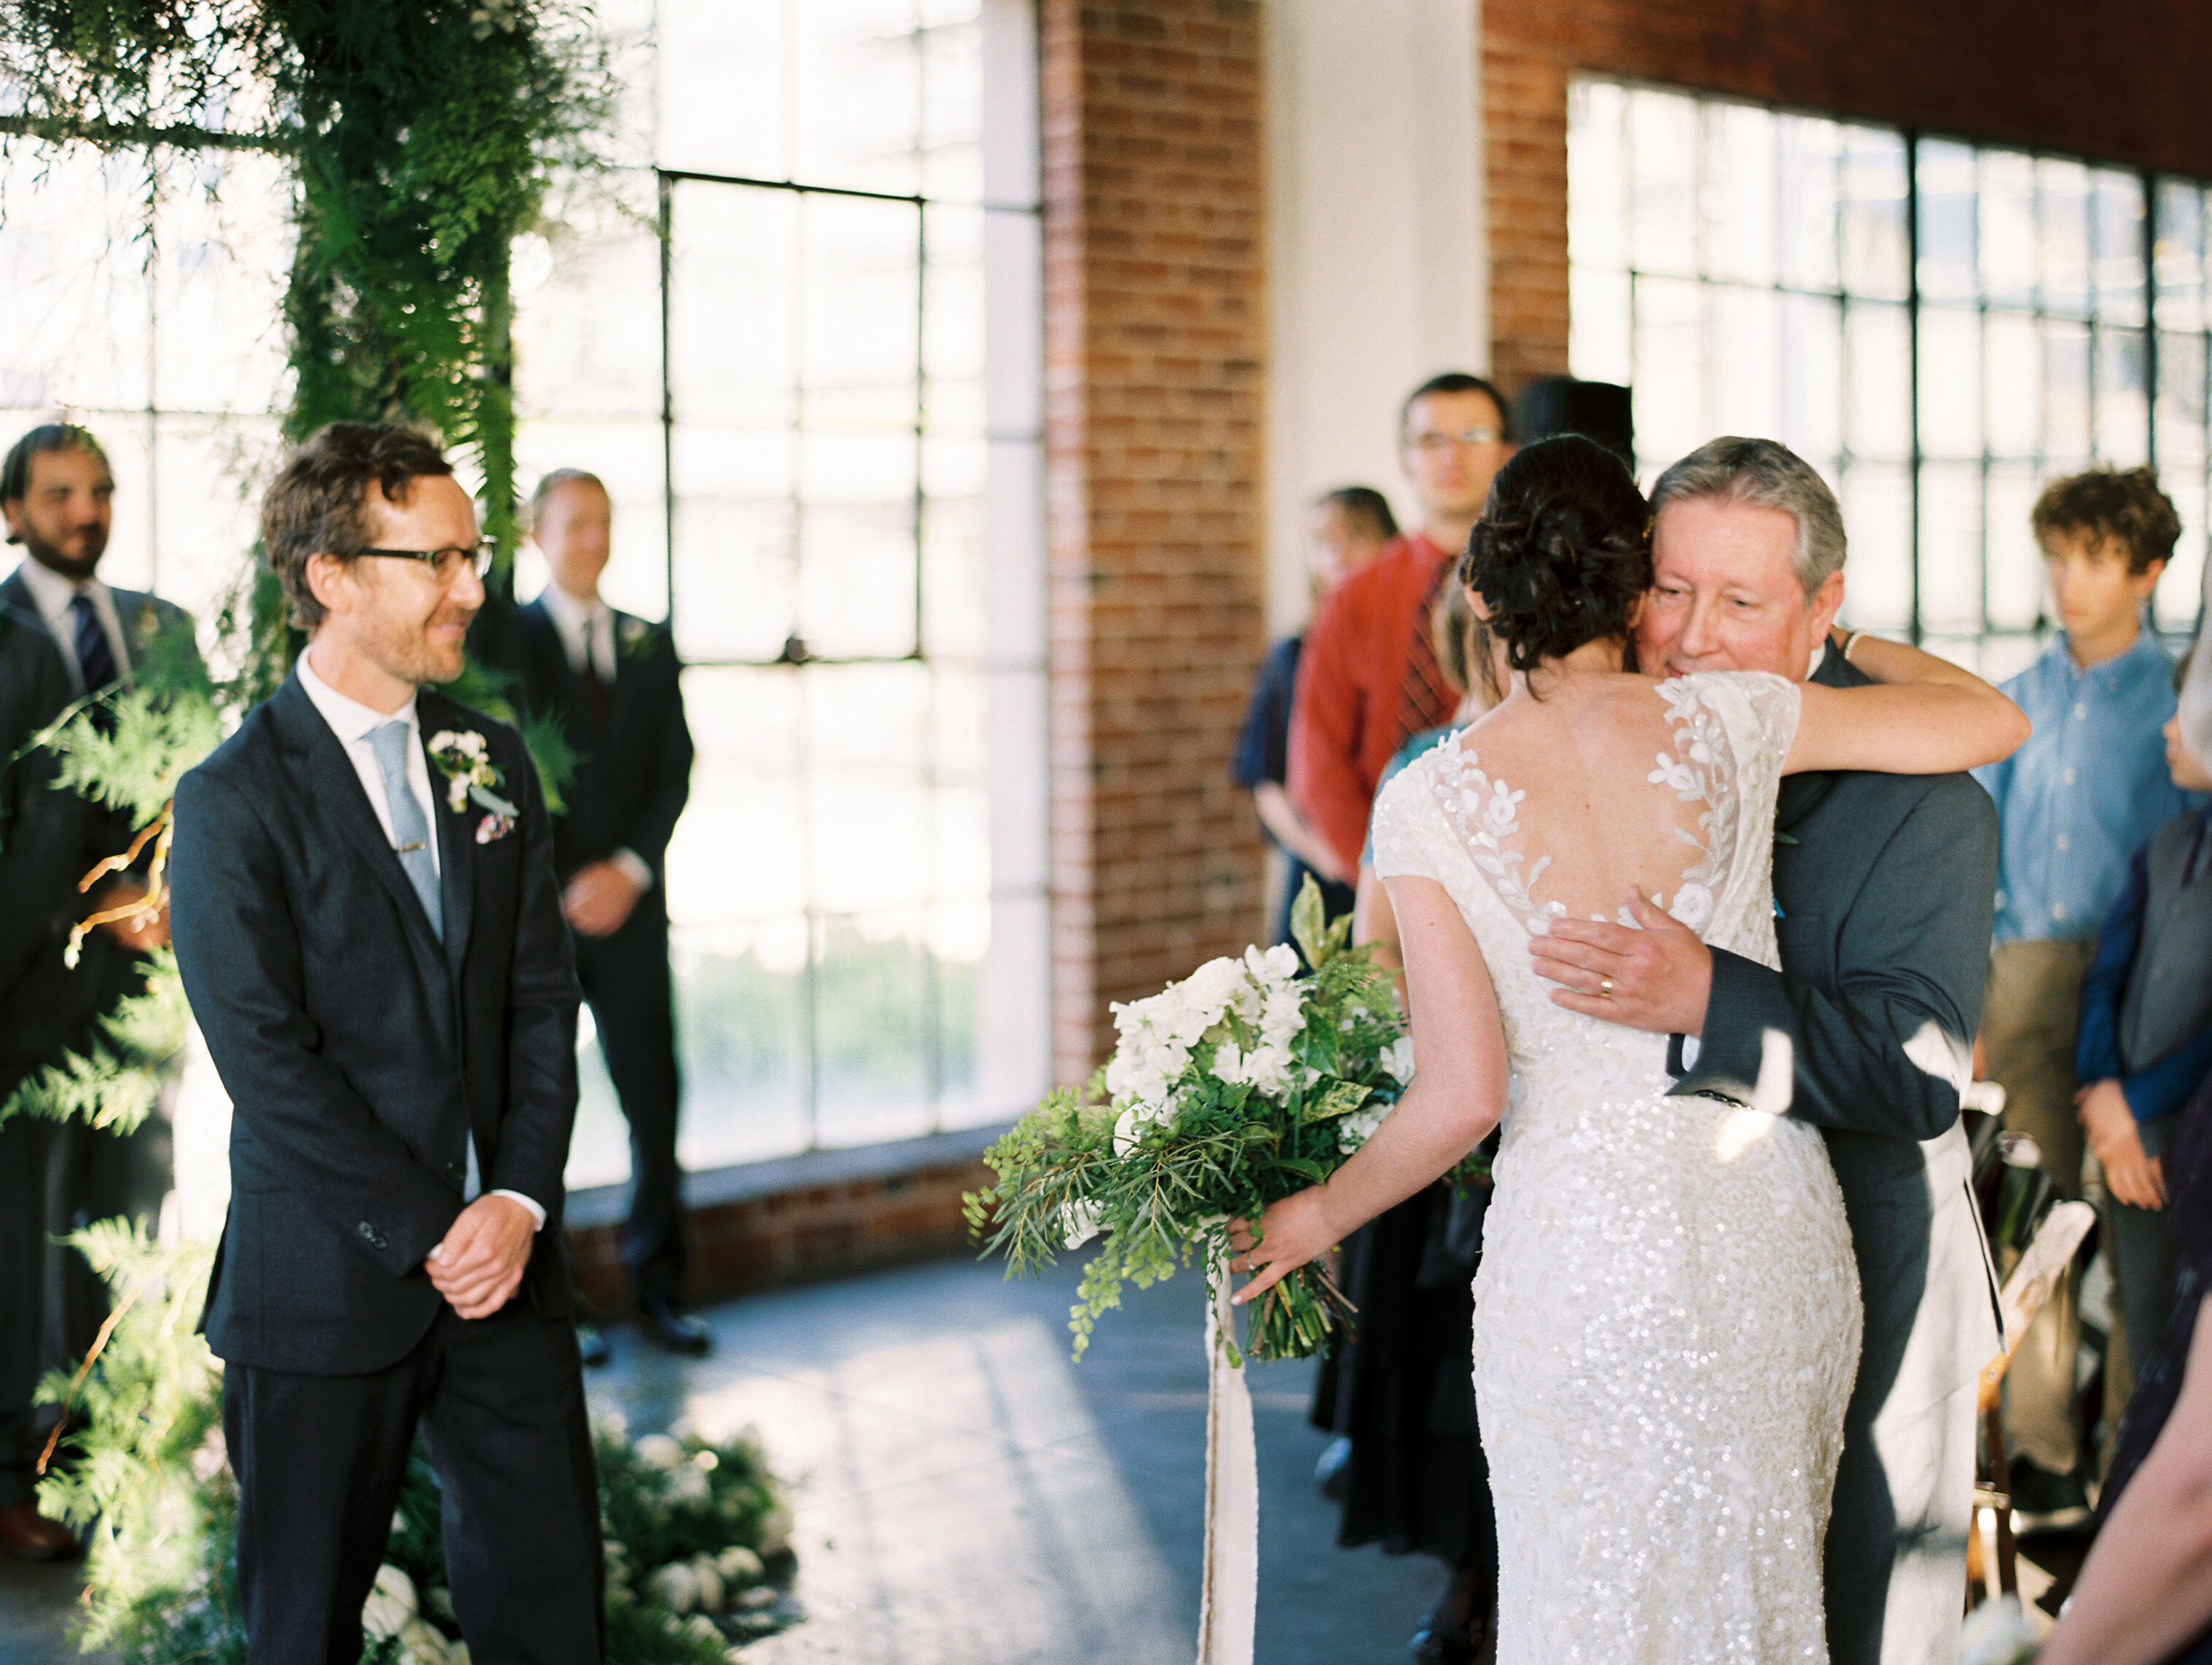 How to have the budget talk with your families for your wedding